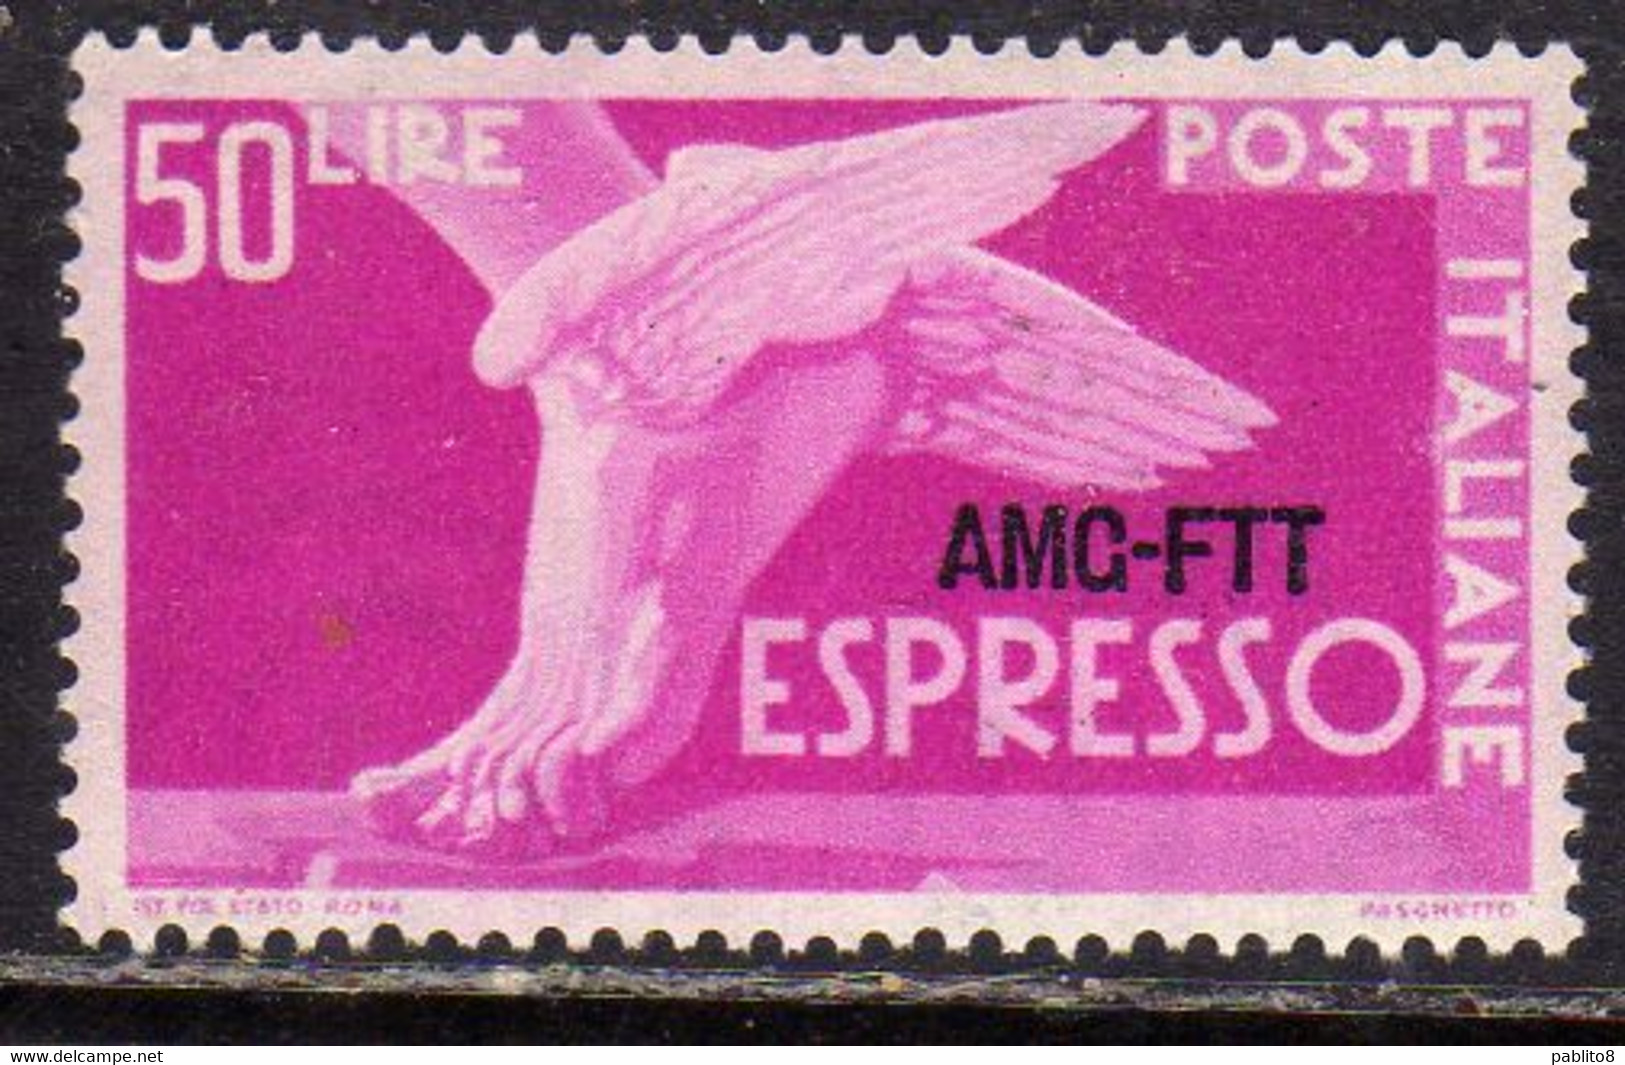 TRIESTE A 1953 AMG-FTT OVERPRINTED ESPRESSO SPECIAL DELIVERY LIRE 50 RUOTA III MNH BEN CENTRATO - Poste Exprèsse